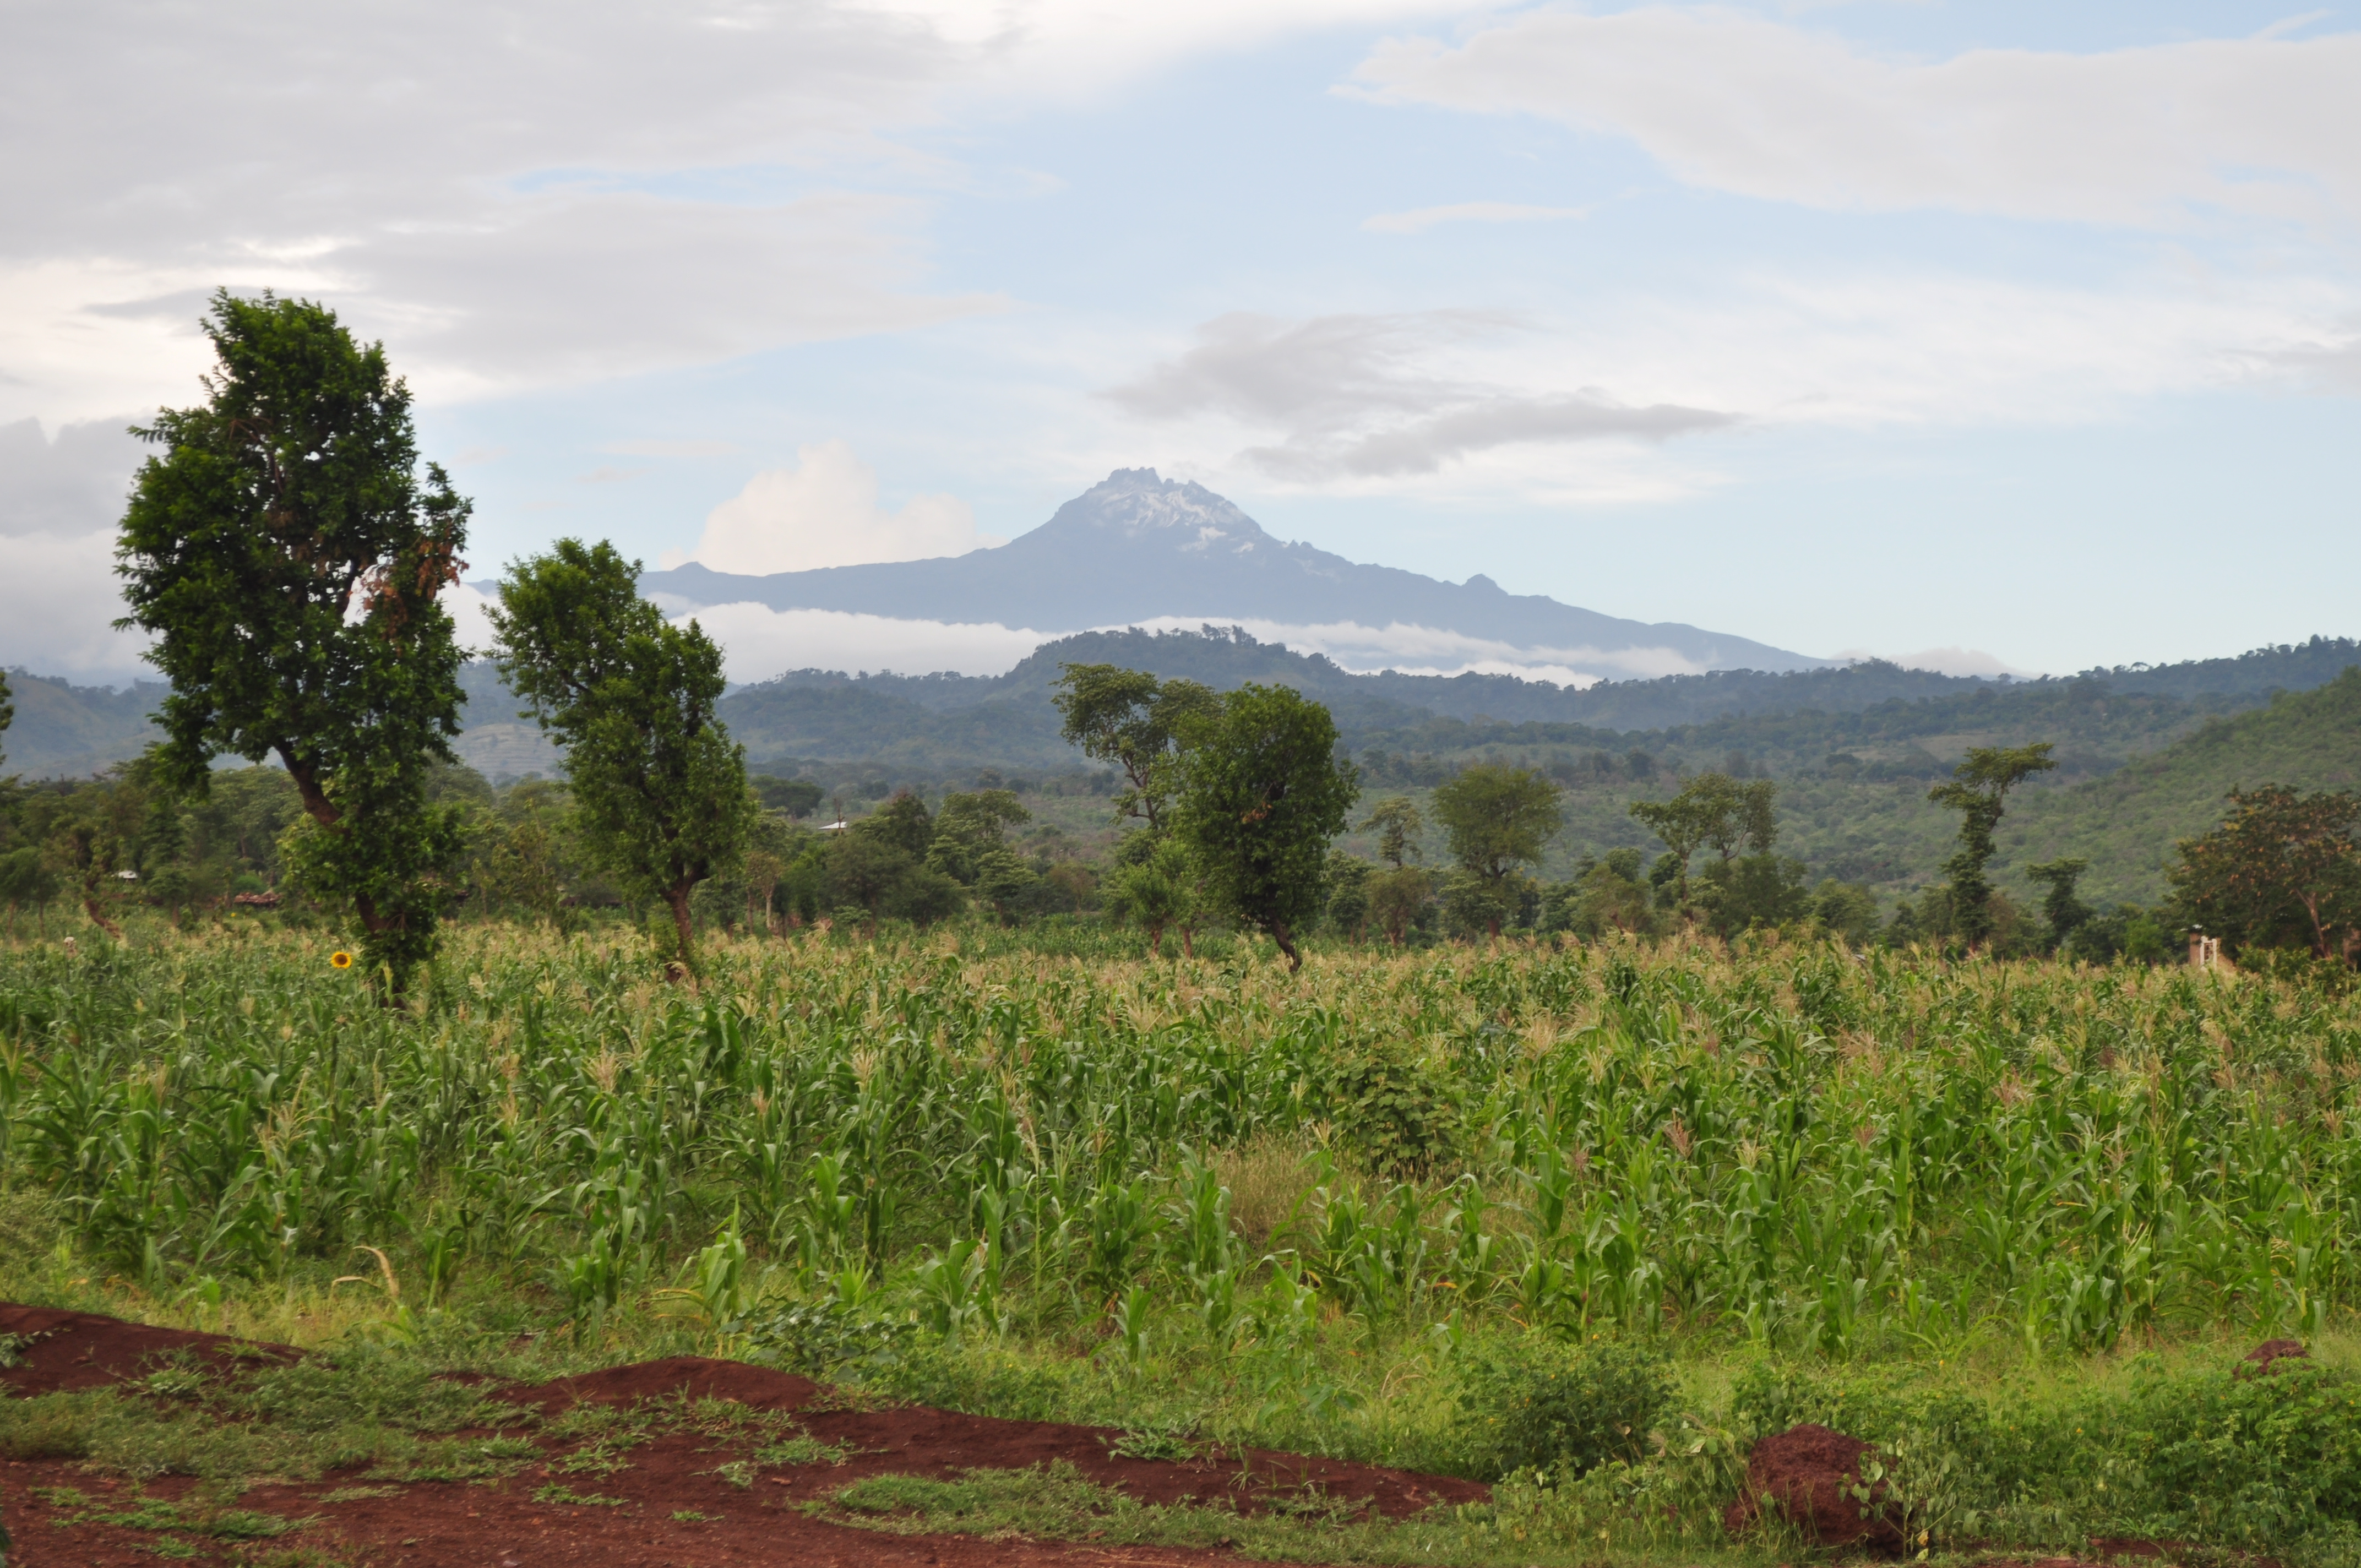 Image: North Pare mountains in Tanzania with maize fields in foreground